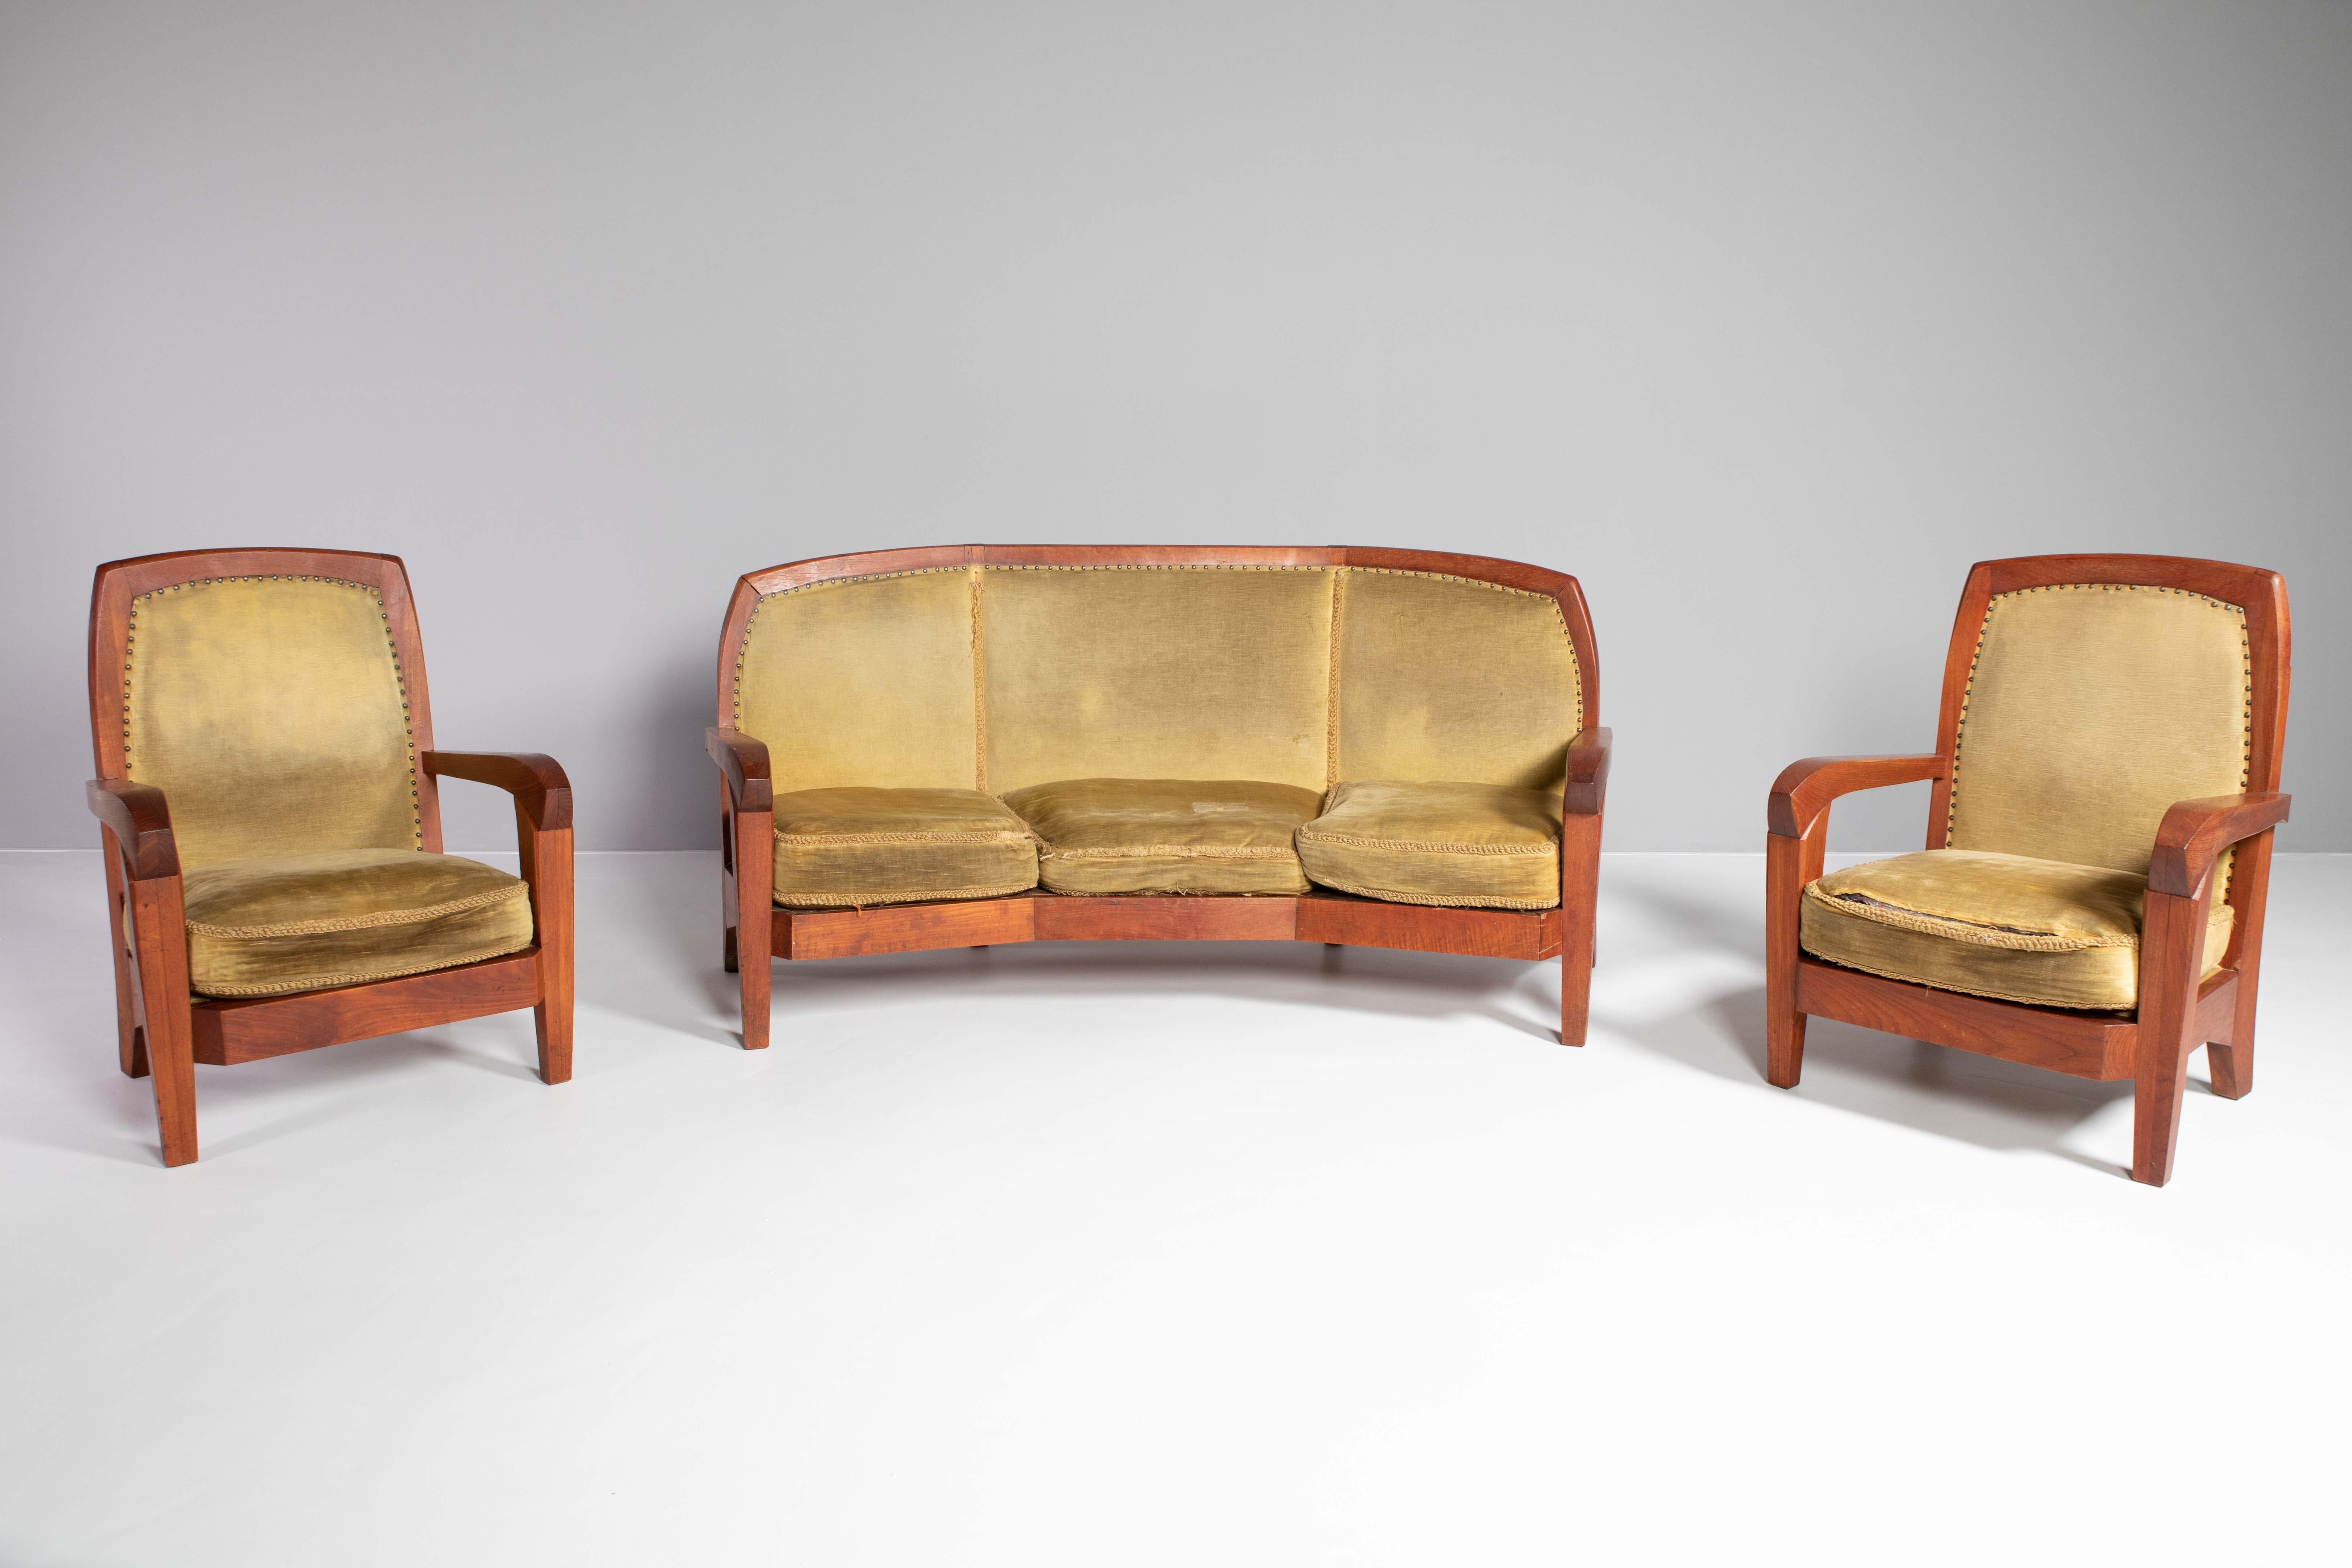 The ensemble includes two armchairs and a slightly curved sofa, also with armrests.

The furniture was last located in Haarlem in the house of Dirk Jan Metz, three of the photographs show the seating group in his house.

According to information